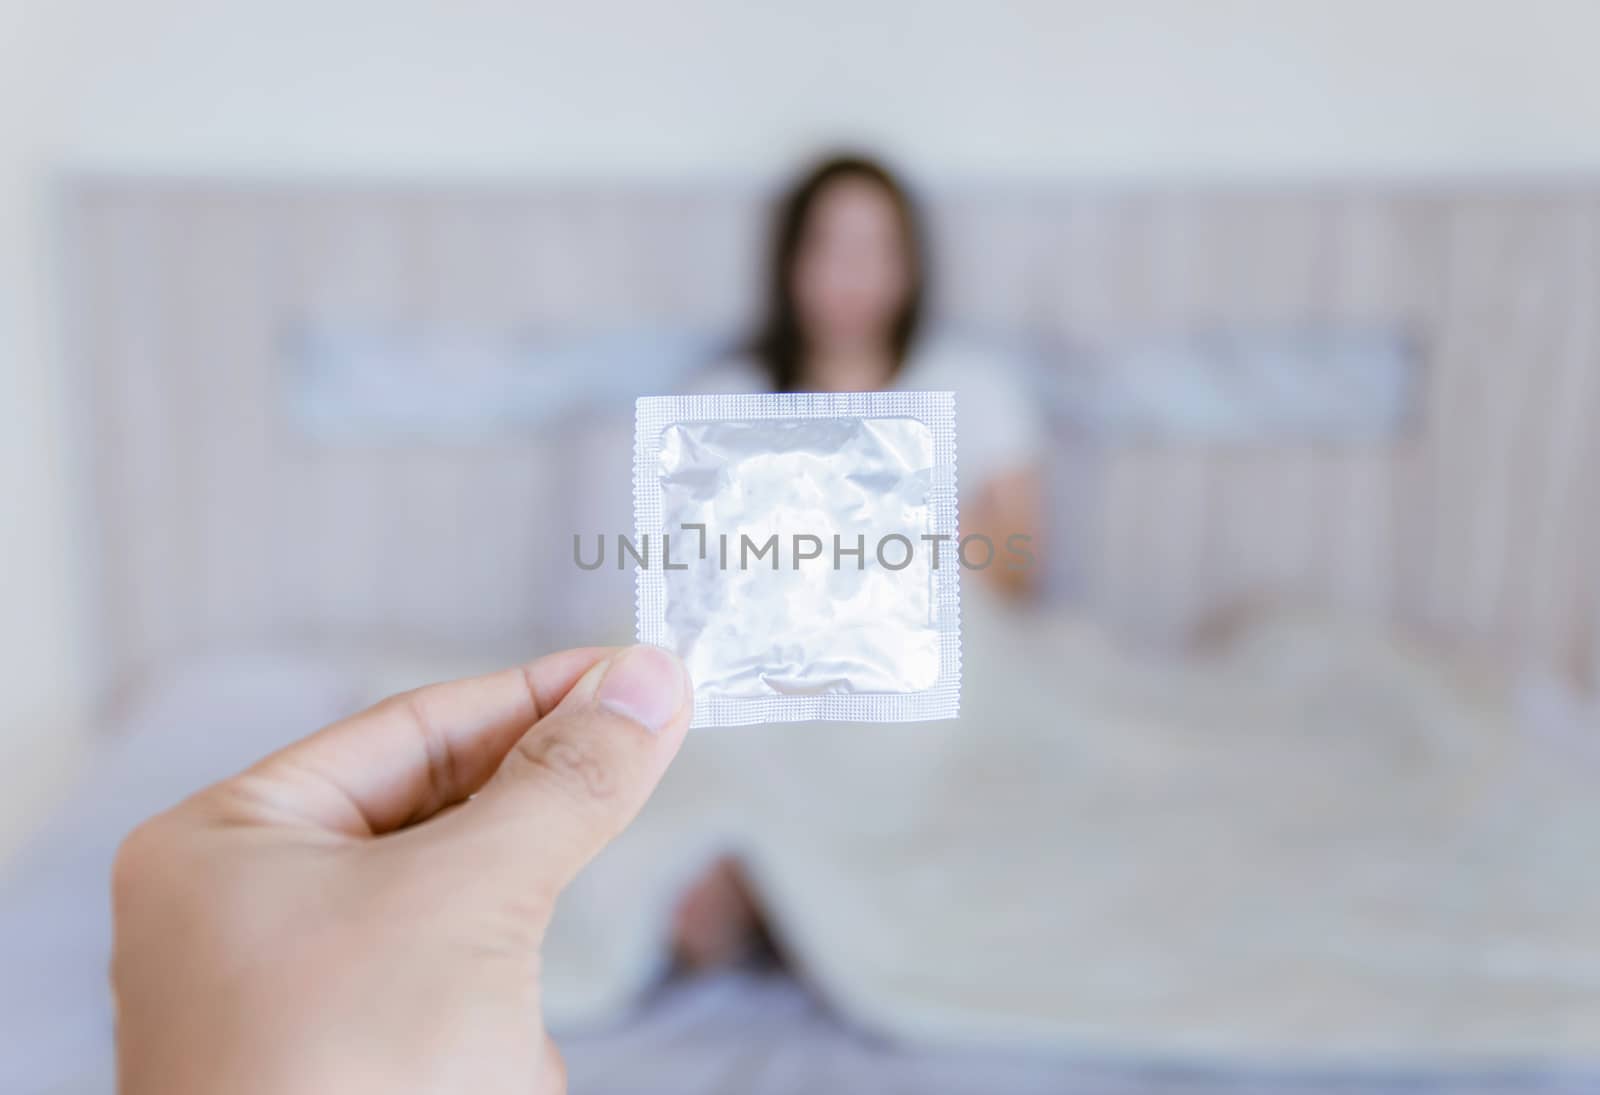 The man with the hand a condoms of the woman lying on the bed is blurred by sompongtom